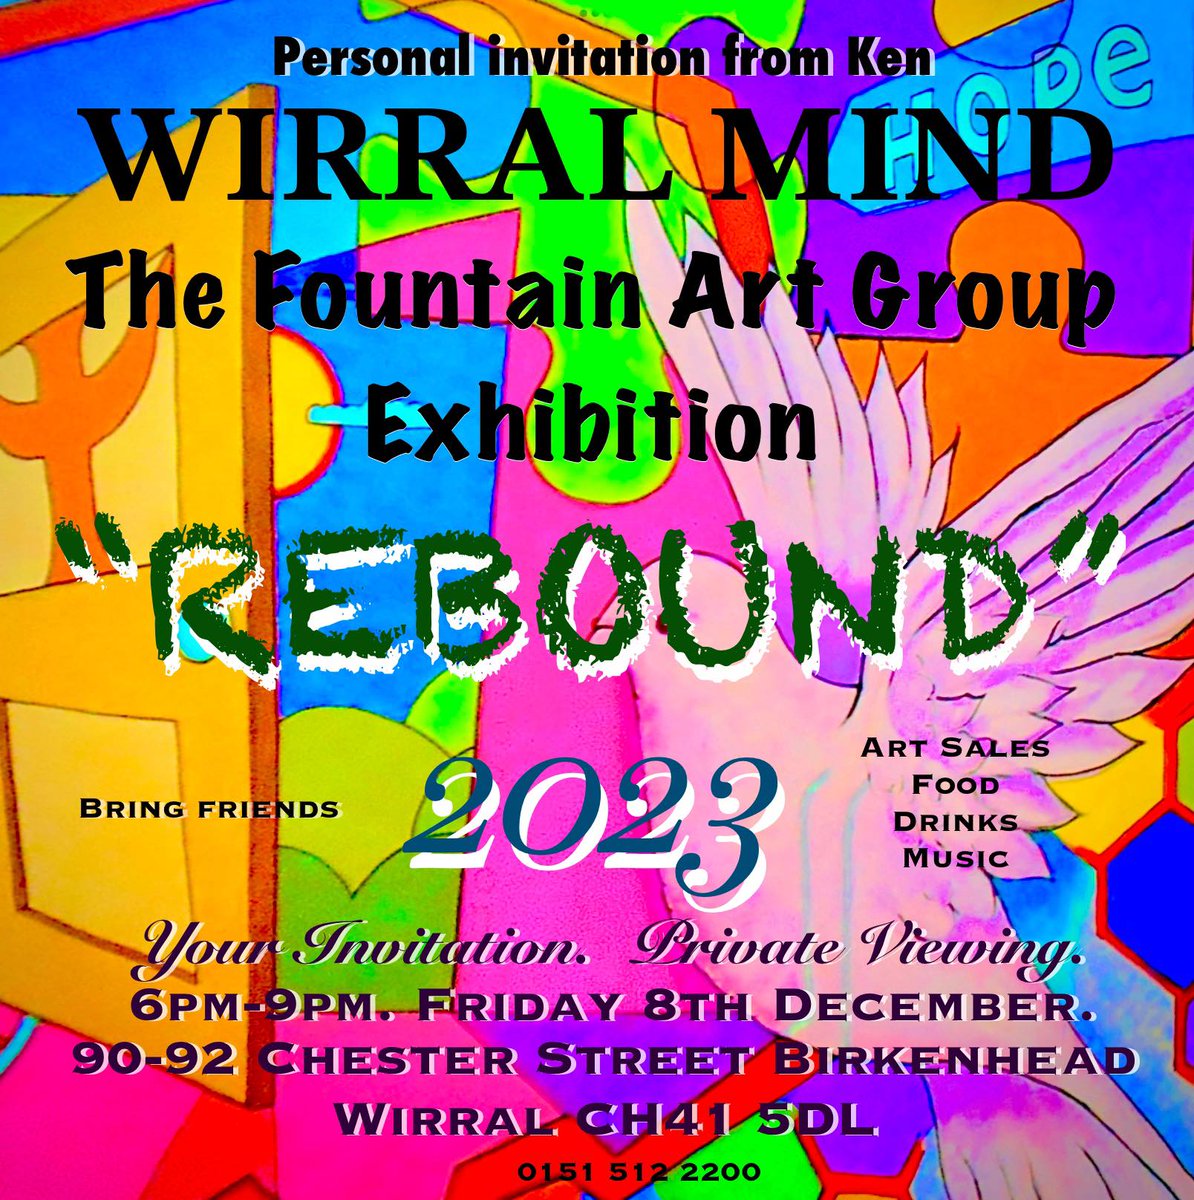 Inject some colour and positivity into your life at tonight's opening celebration of REBOUND, an exhibition by @WirralMind's Fountain Art Group in #Birkenhead. 🌈 tinyurl.com/rvx3ferf #mentalhealth #wellbeing #creativity